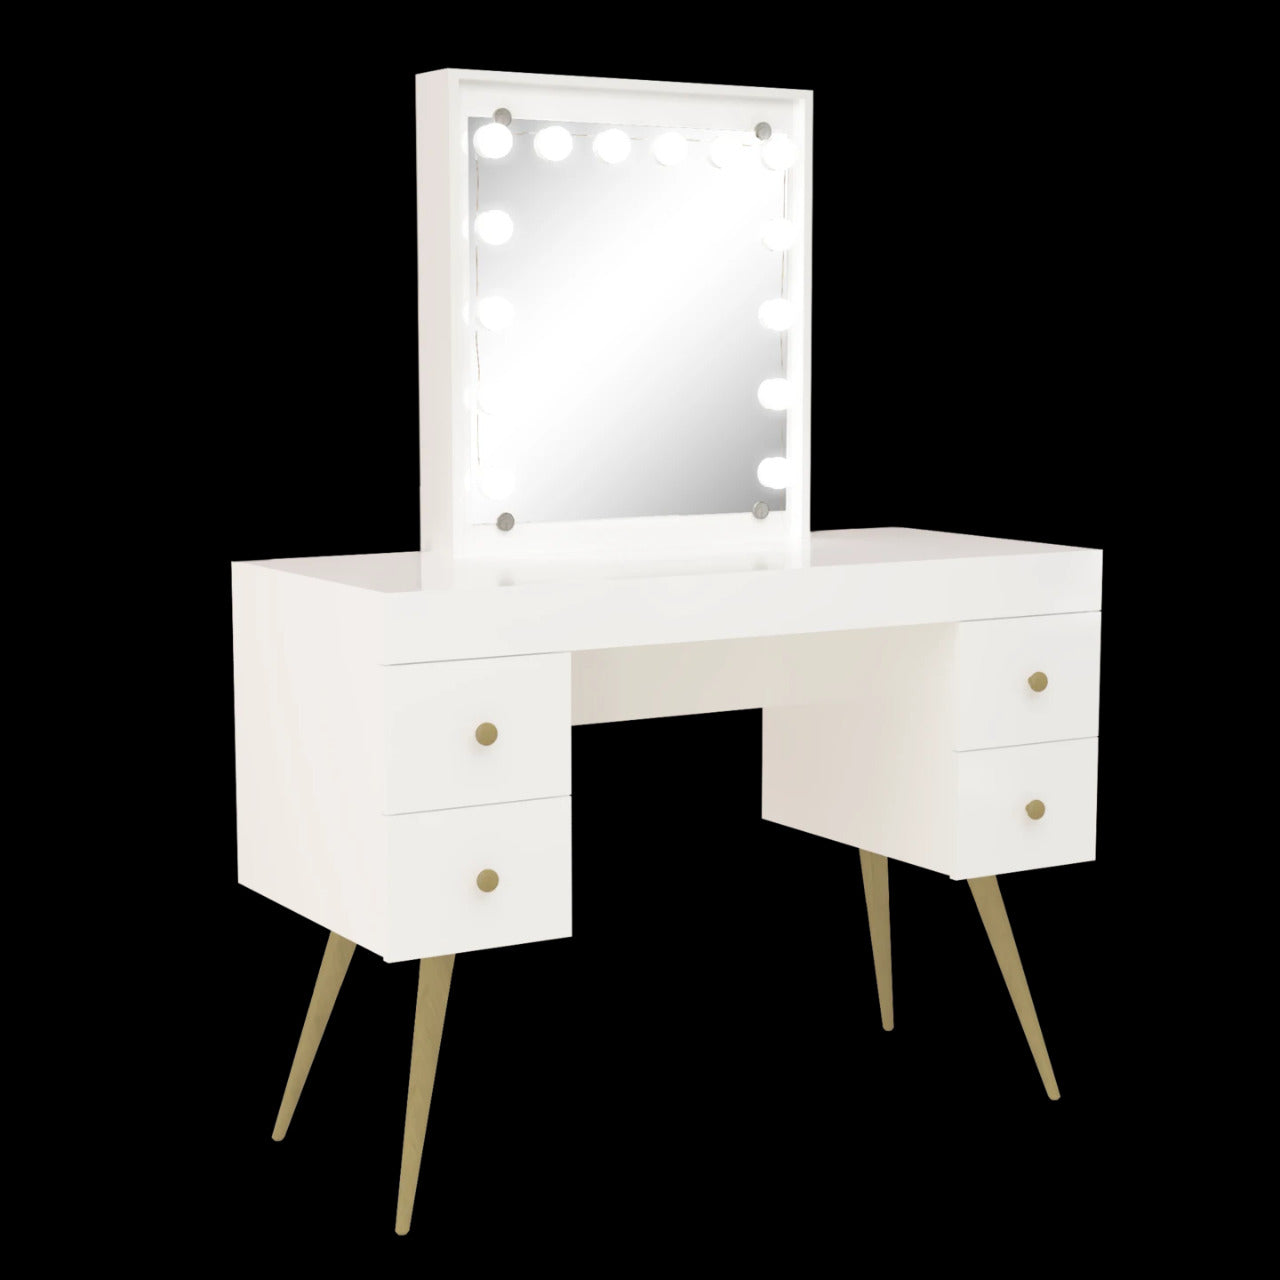 Makeup Vanity: Classic Dressing Table with Light Bulbs